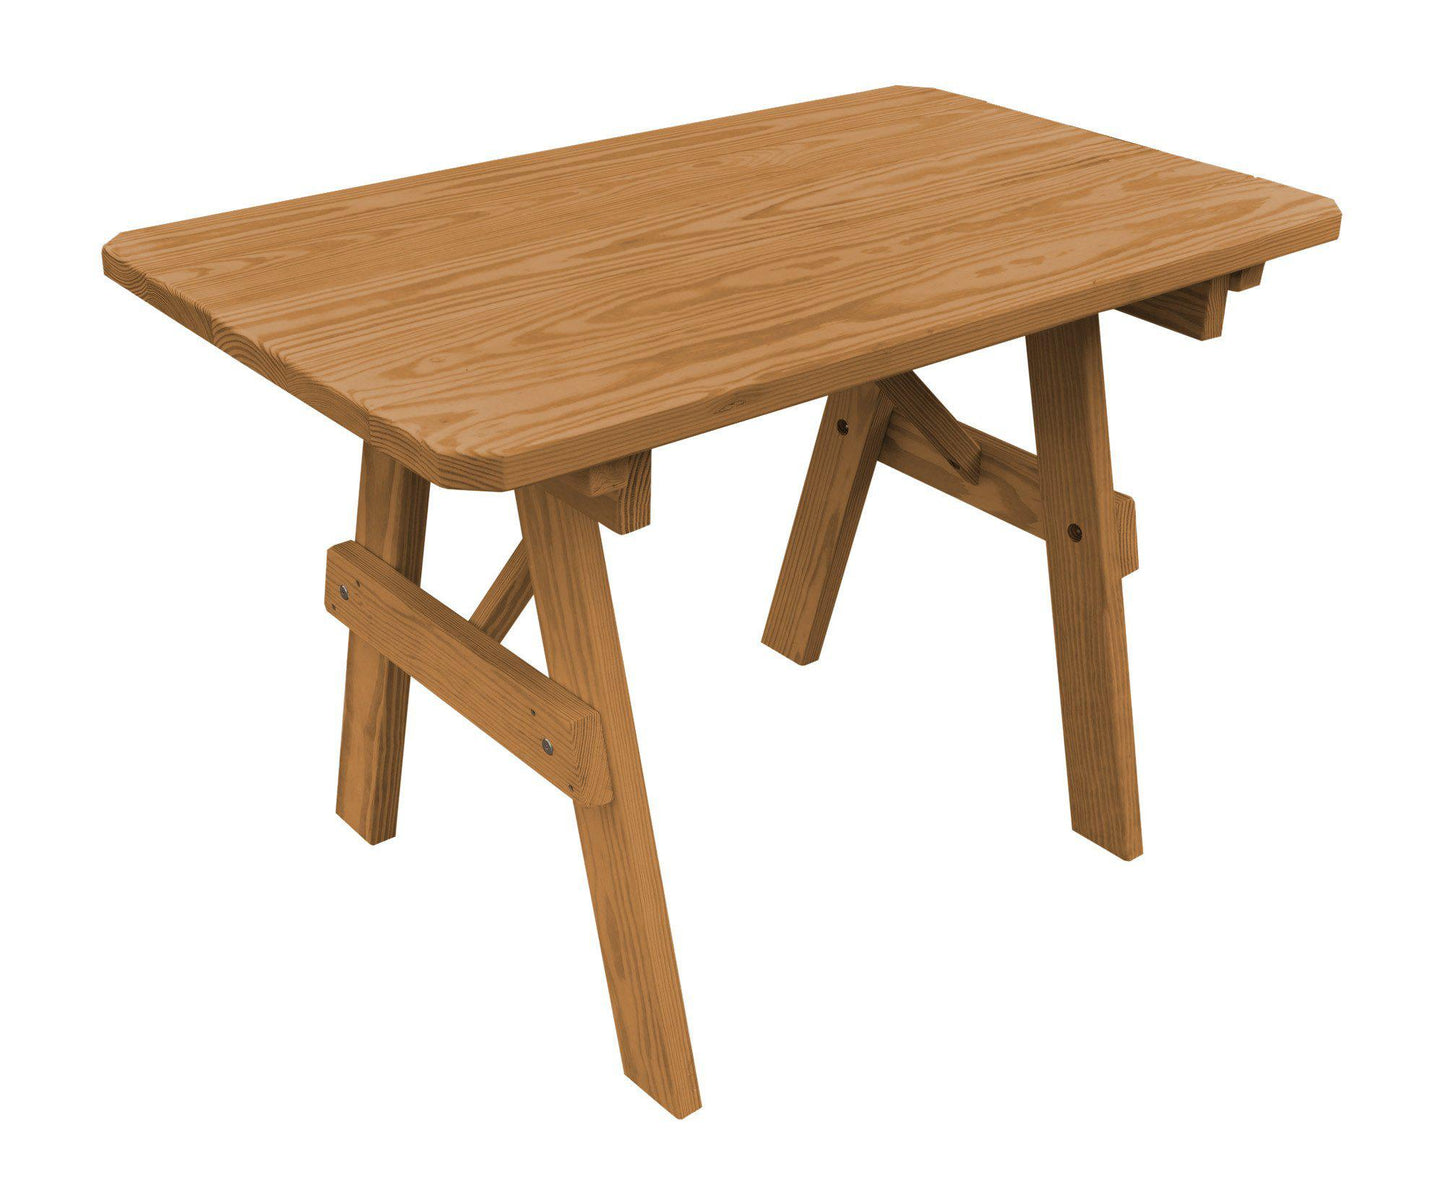 A&L Furniture Co. Pressure Treated Pine 5' Traditional Table Only - LEAD TIME TO SHIP 10 BUSINESS DAYS